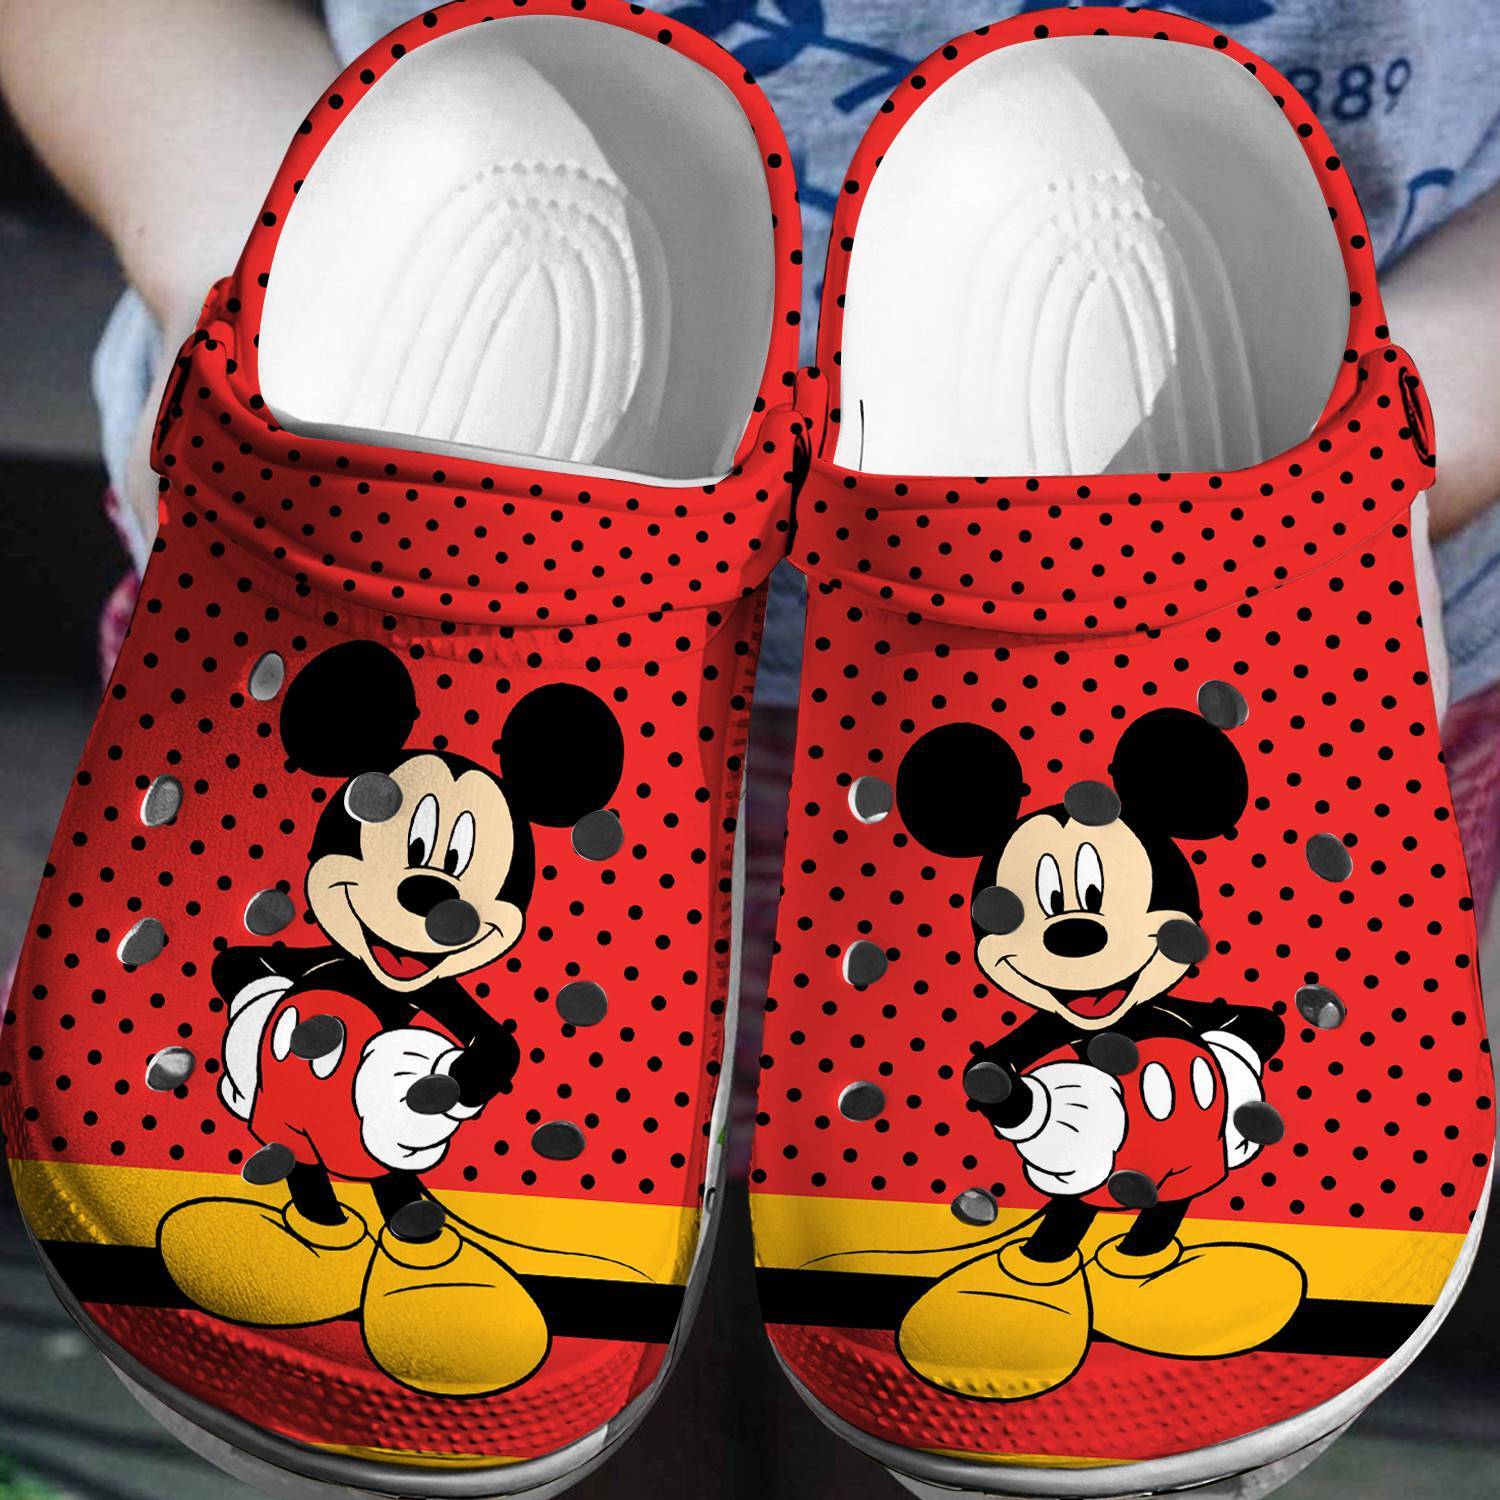 Whimsical Delight: Mickey Mouse Crocss Classic Clogs